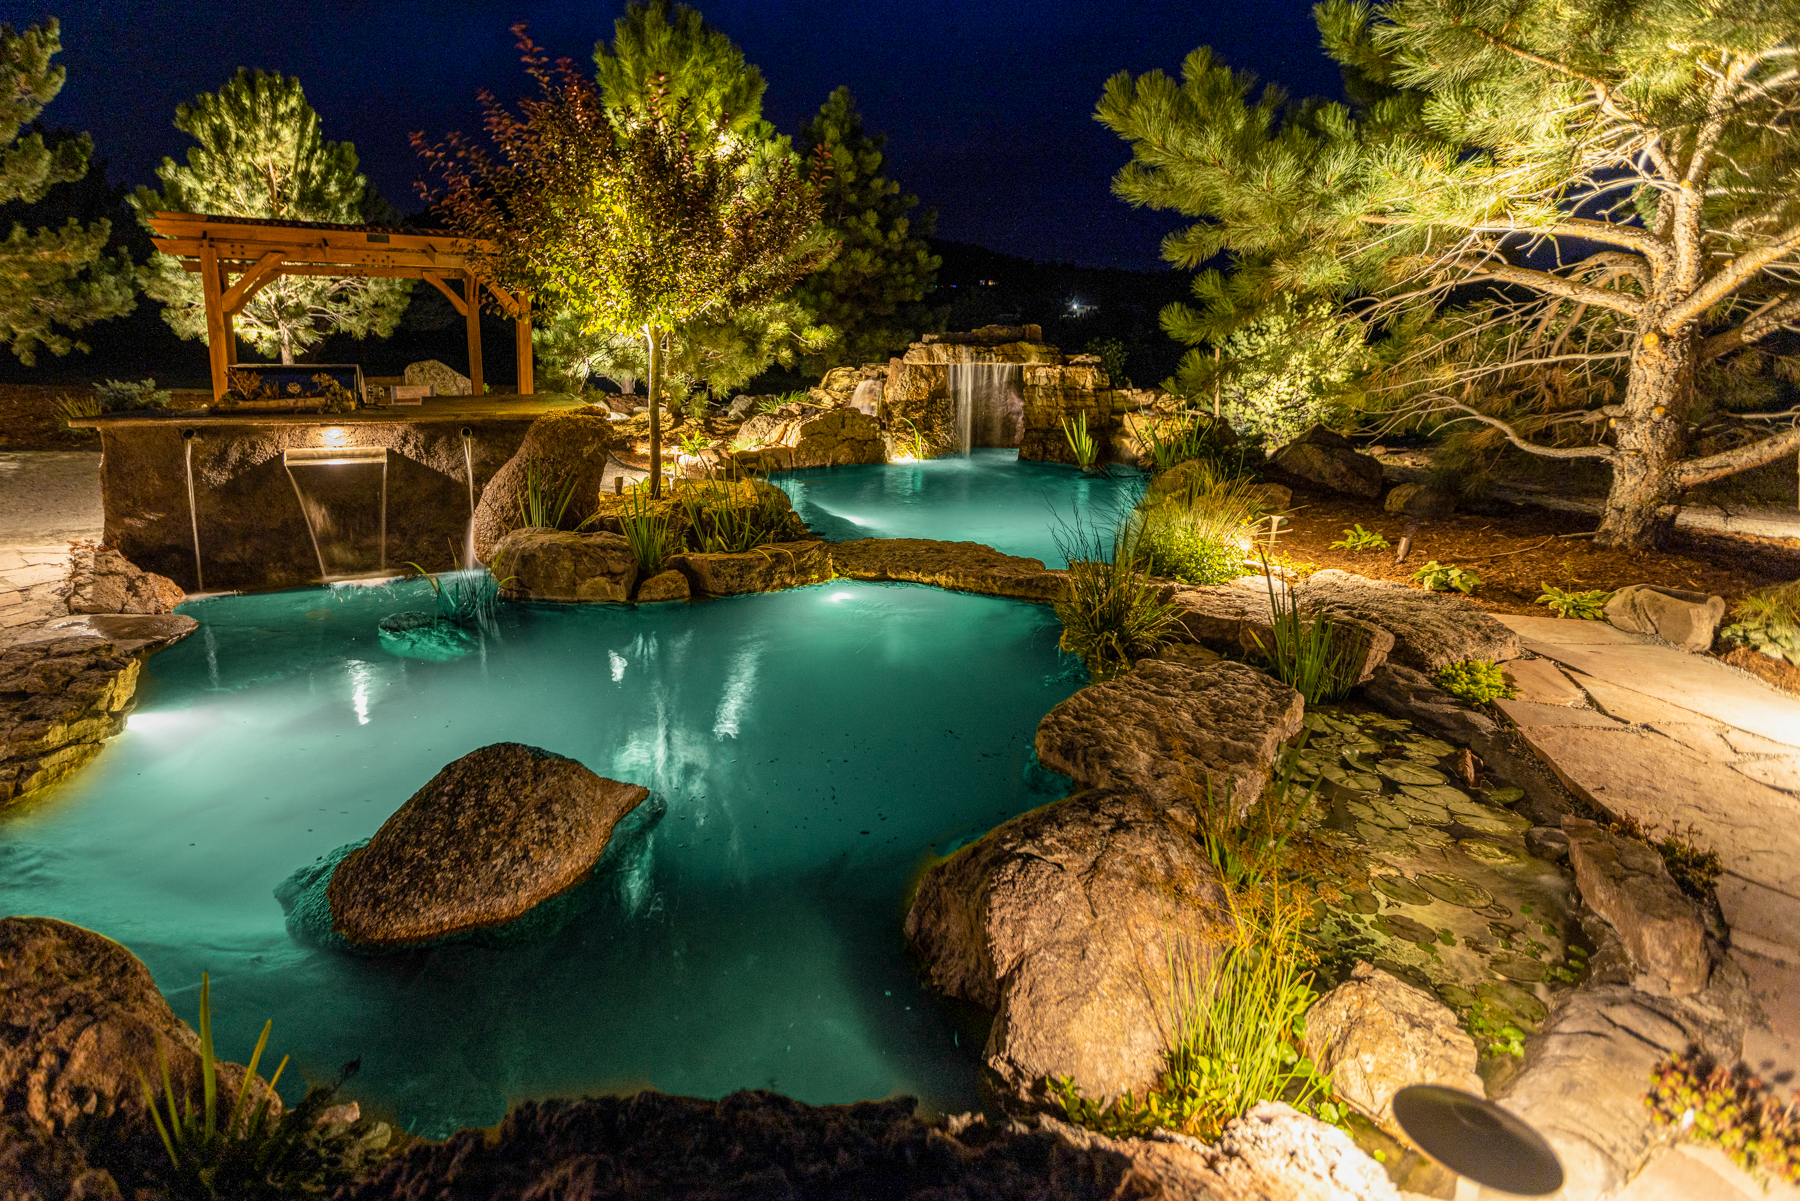 photo of a large natural rock water feature at night with underwater lighting and aquatic plants